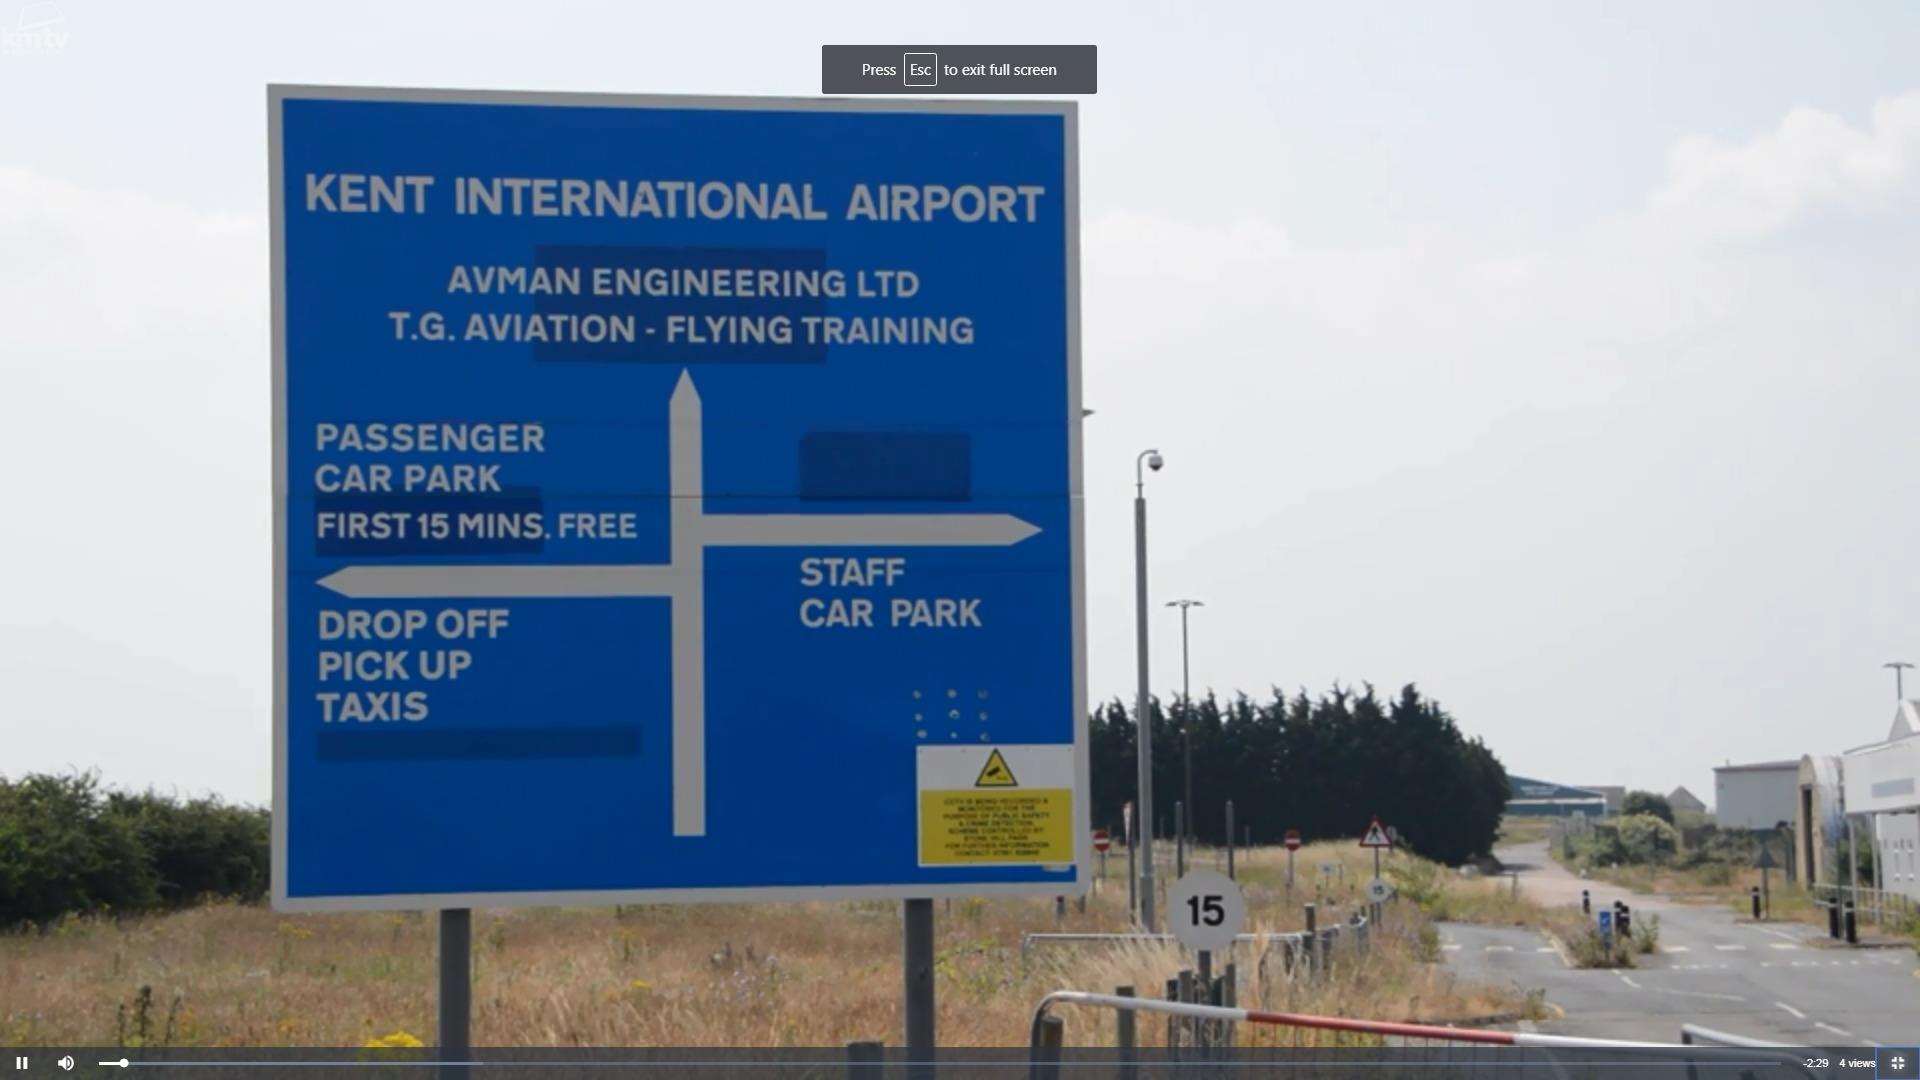 RiverOak Strategic Partners want to reopen Manston as a cargo airport